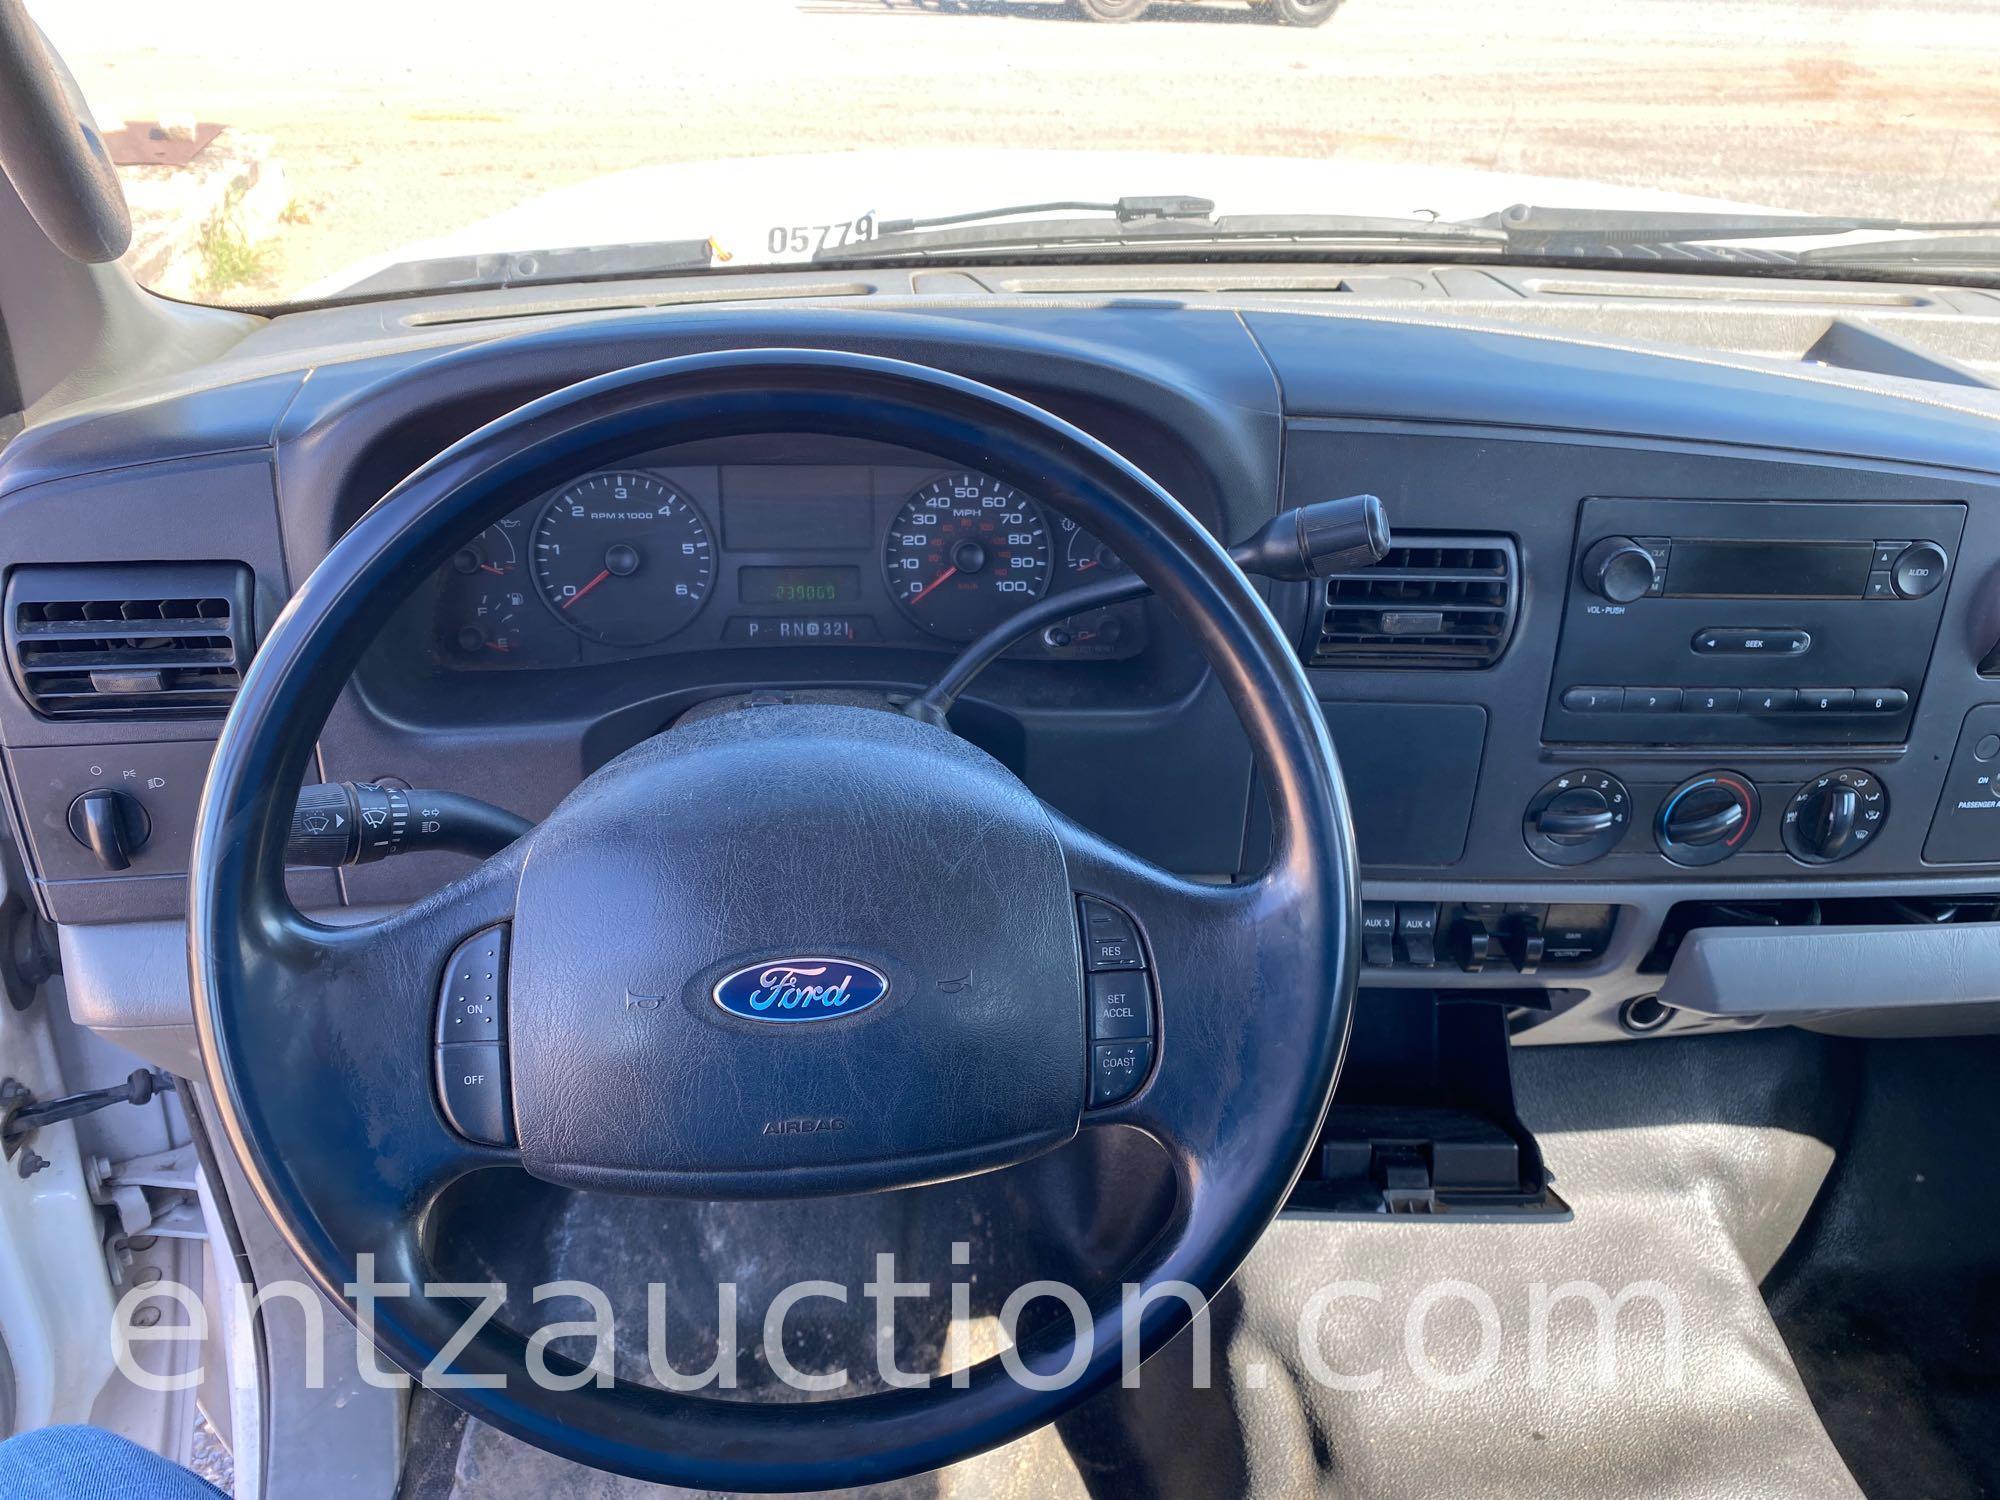 2005 F250 PICKUP, EXTENDED CAB, AUTO, GAS, 5.4L,